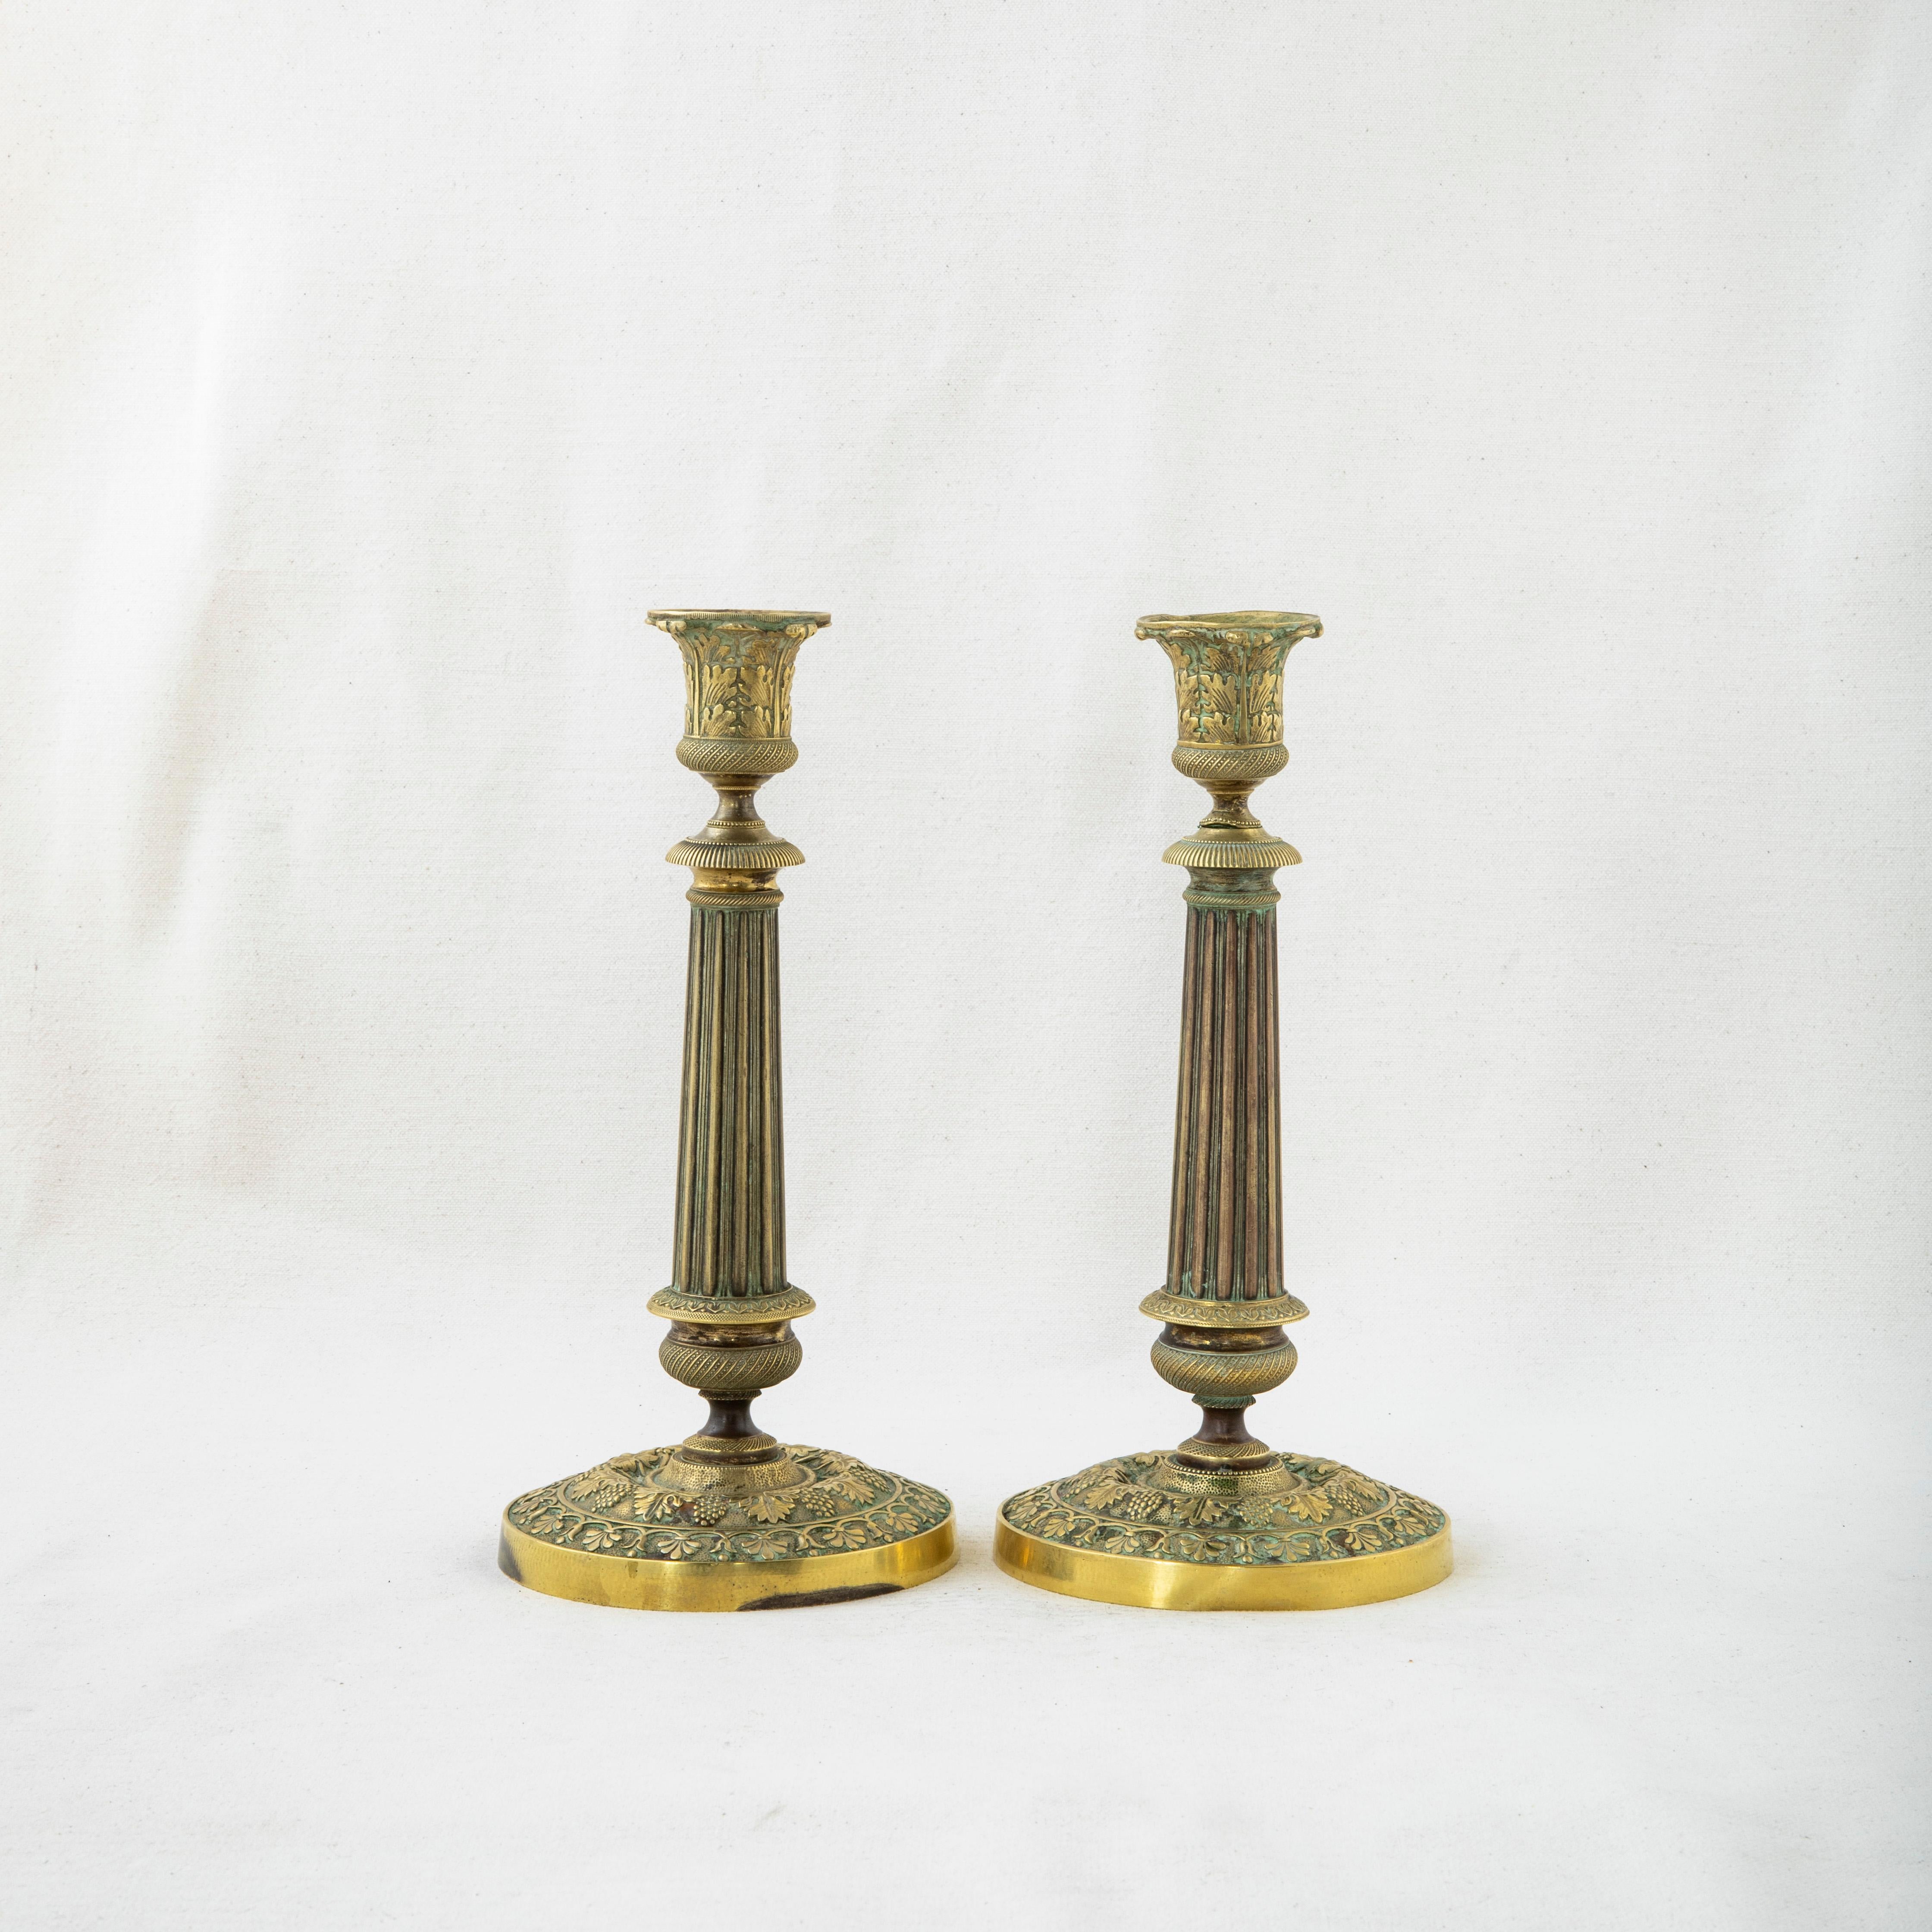 Pair of Late 19th Century French Bronze Candlesticks with Grapes, Grape Leaves For Sale 1